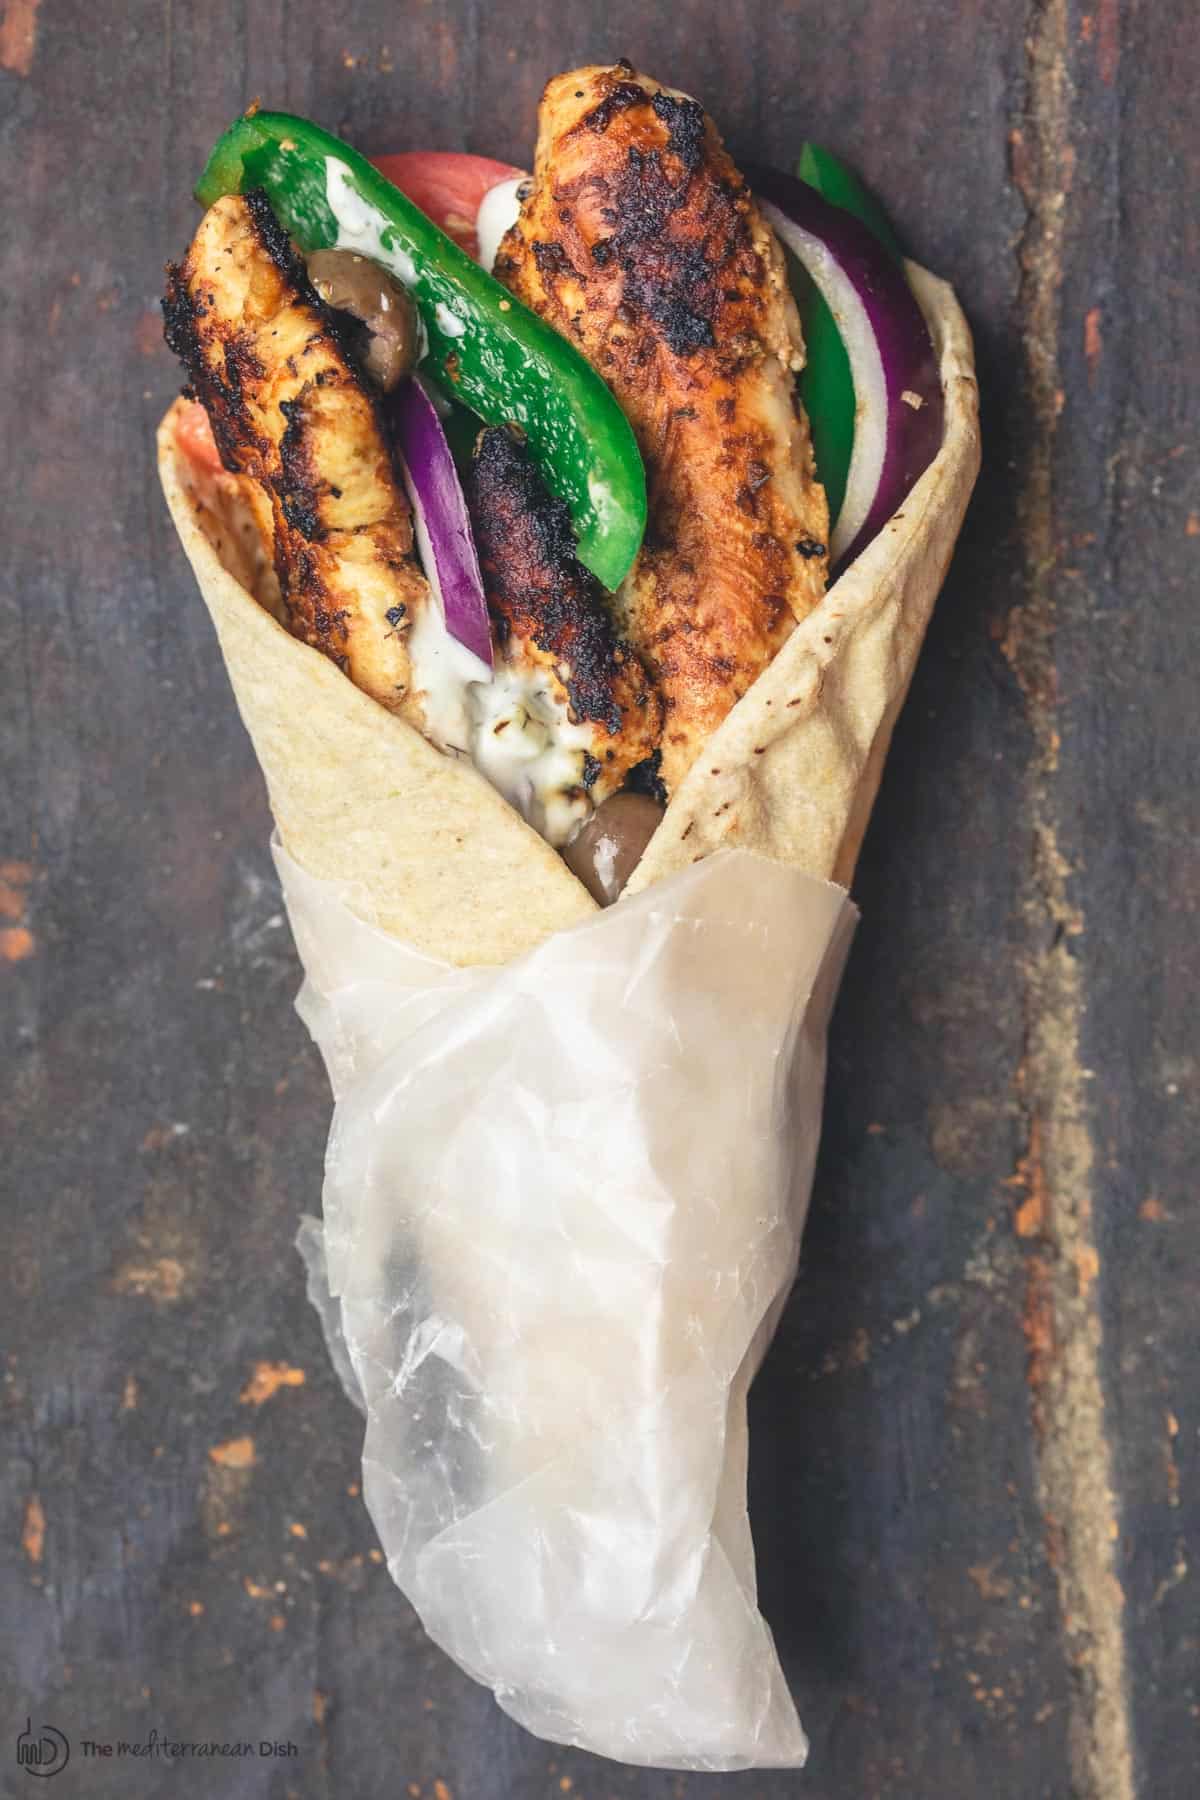 A chicken gyro wrap with tomatoes, onions, green peppers and olives